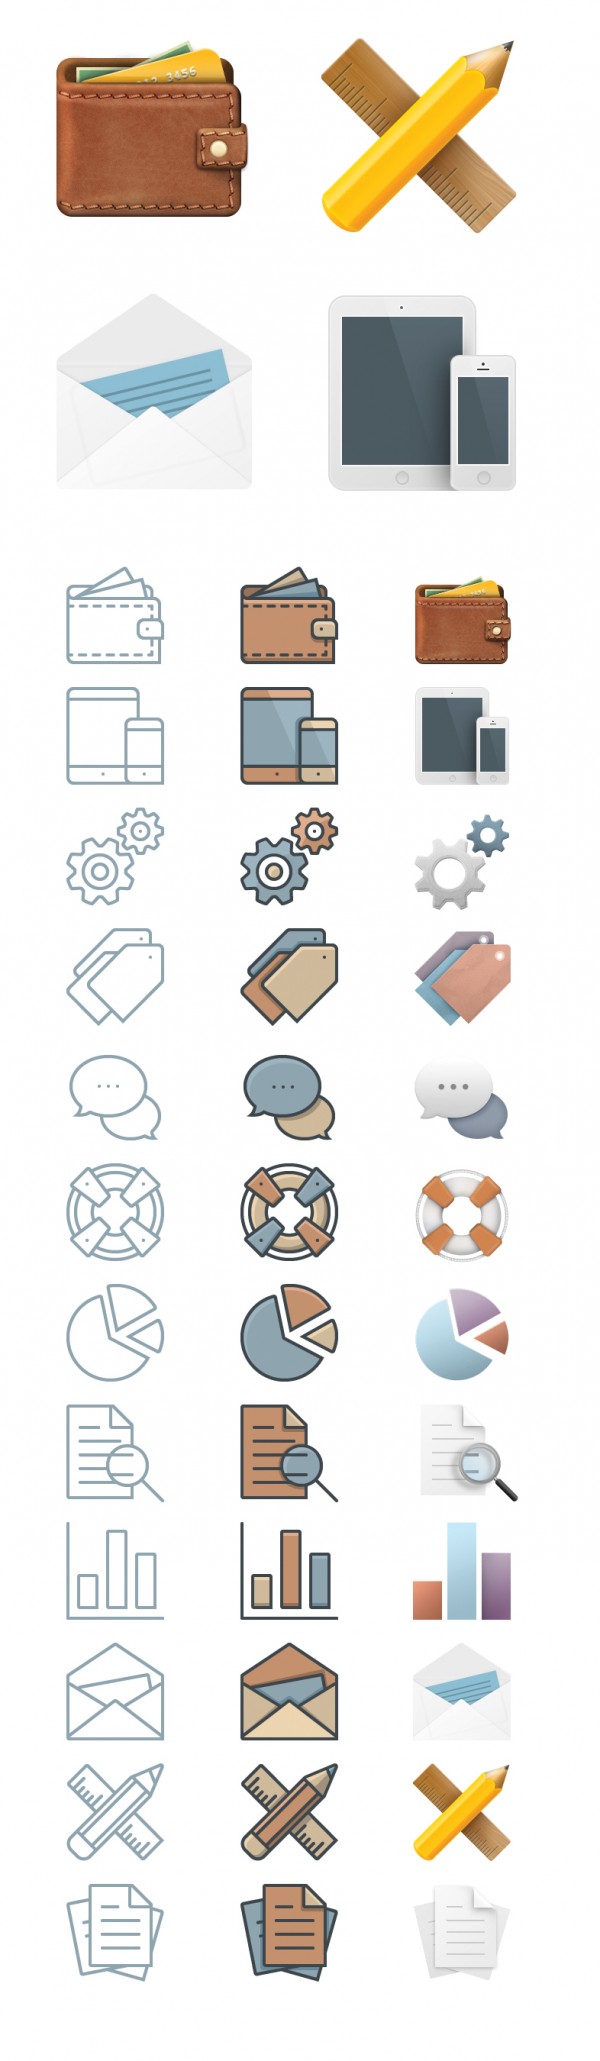 36 Free Business Icons Perfected In Three Unique Styles And Sizes